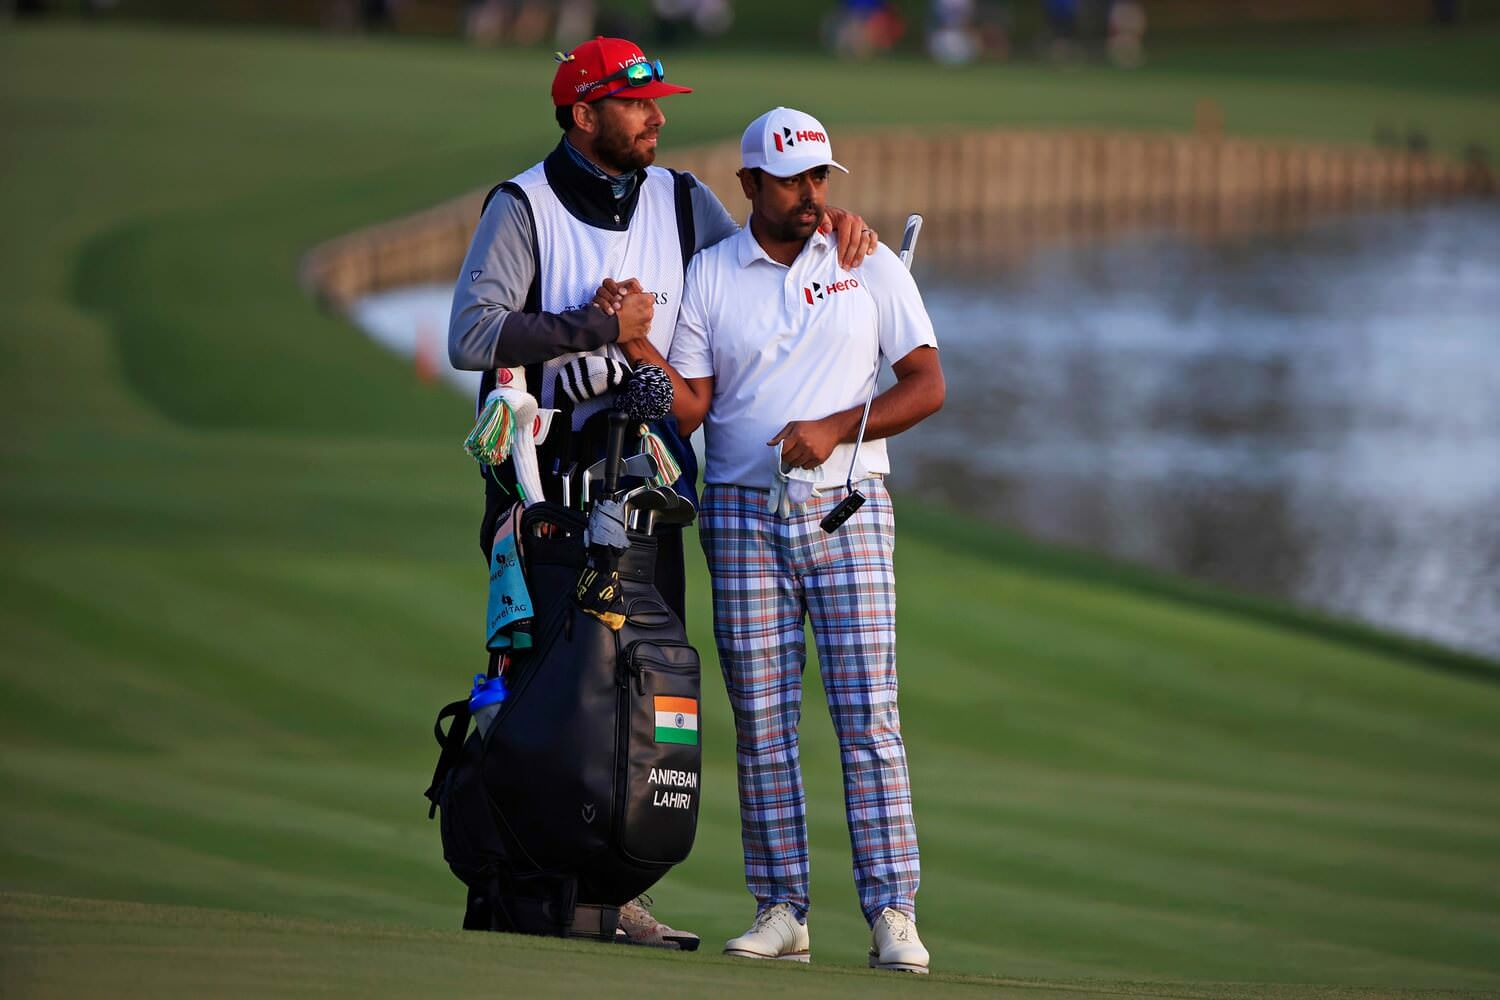 Anirban Lahiri reacts to a missed putt on 18 of the Players Stadium Course Monday, March 14, 2022 at TPC Sawgrass in Ponte Vedra Beach.